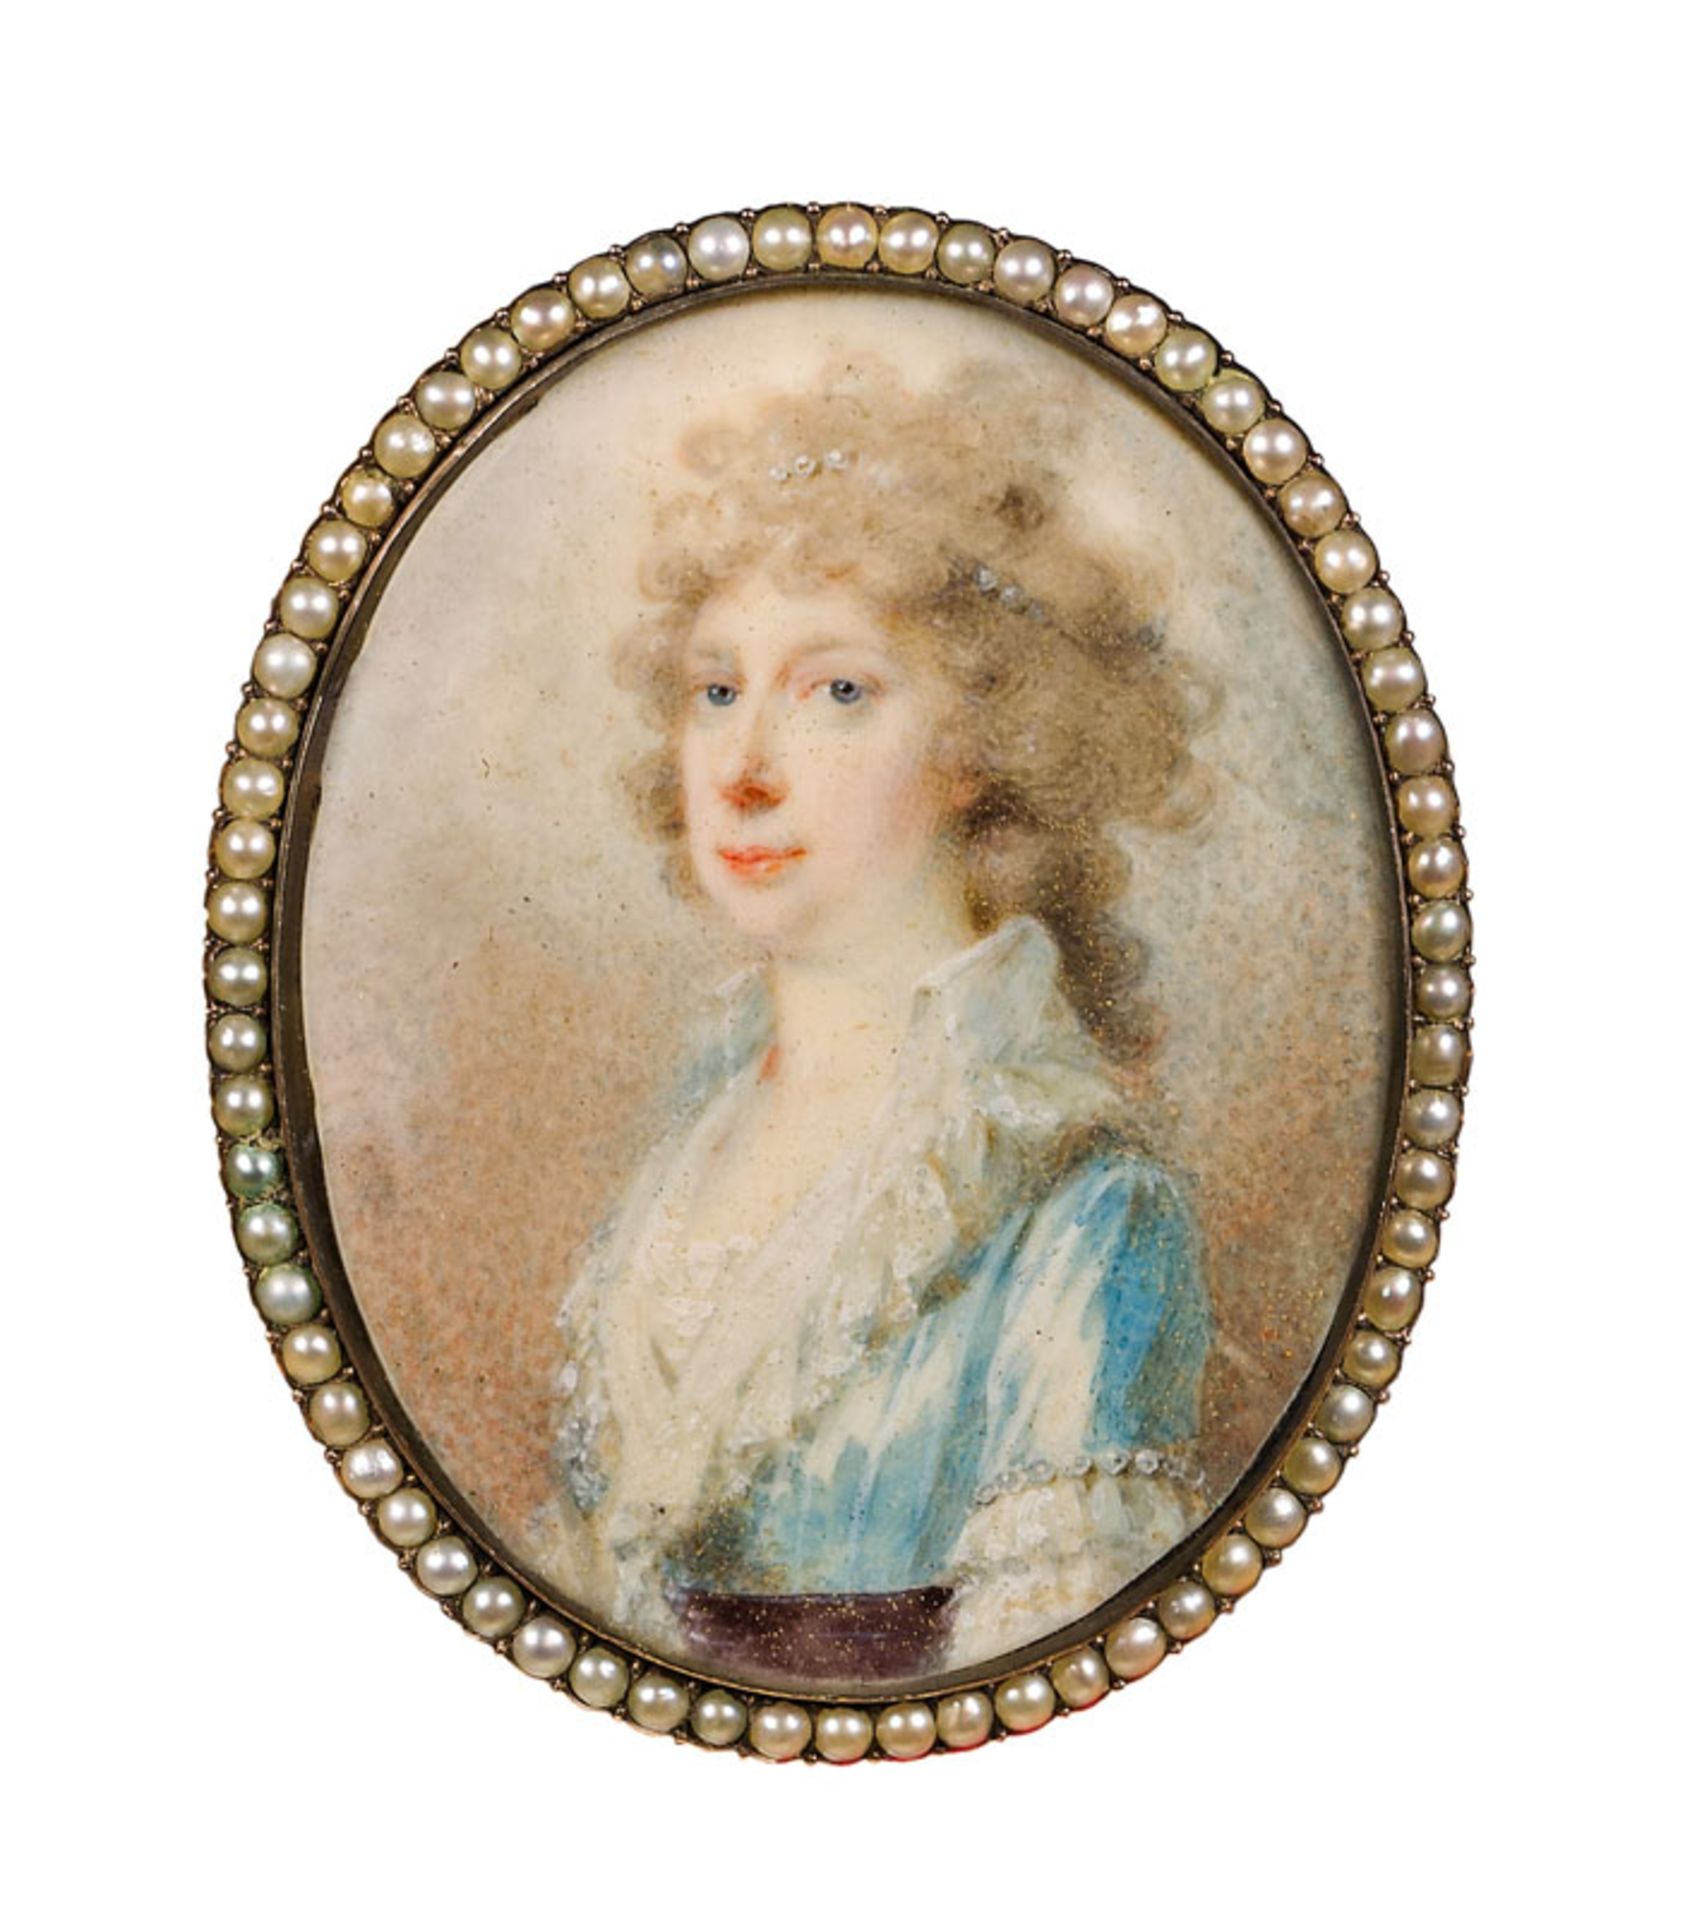 Heinrich Friedrich Füger Young lady in a blue dress  minature on ivory; goldmedal with pearls; 5.5 ×